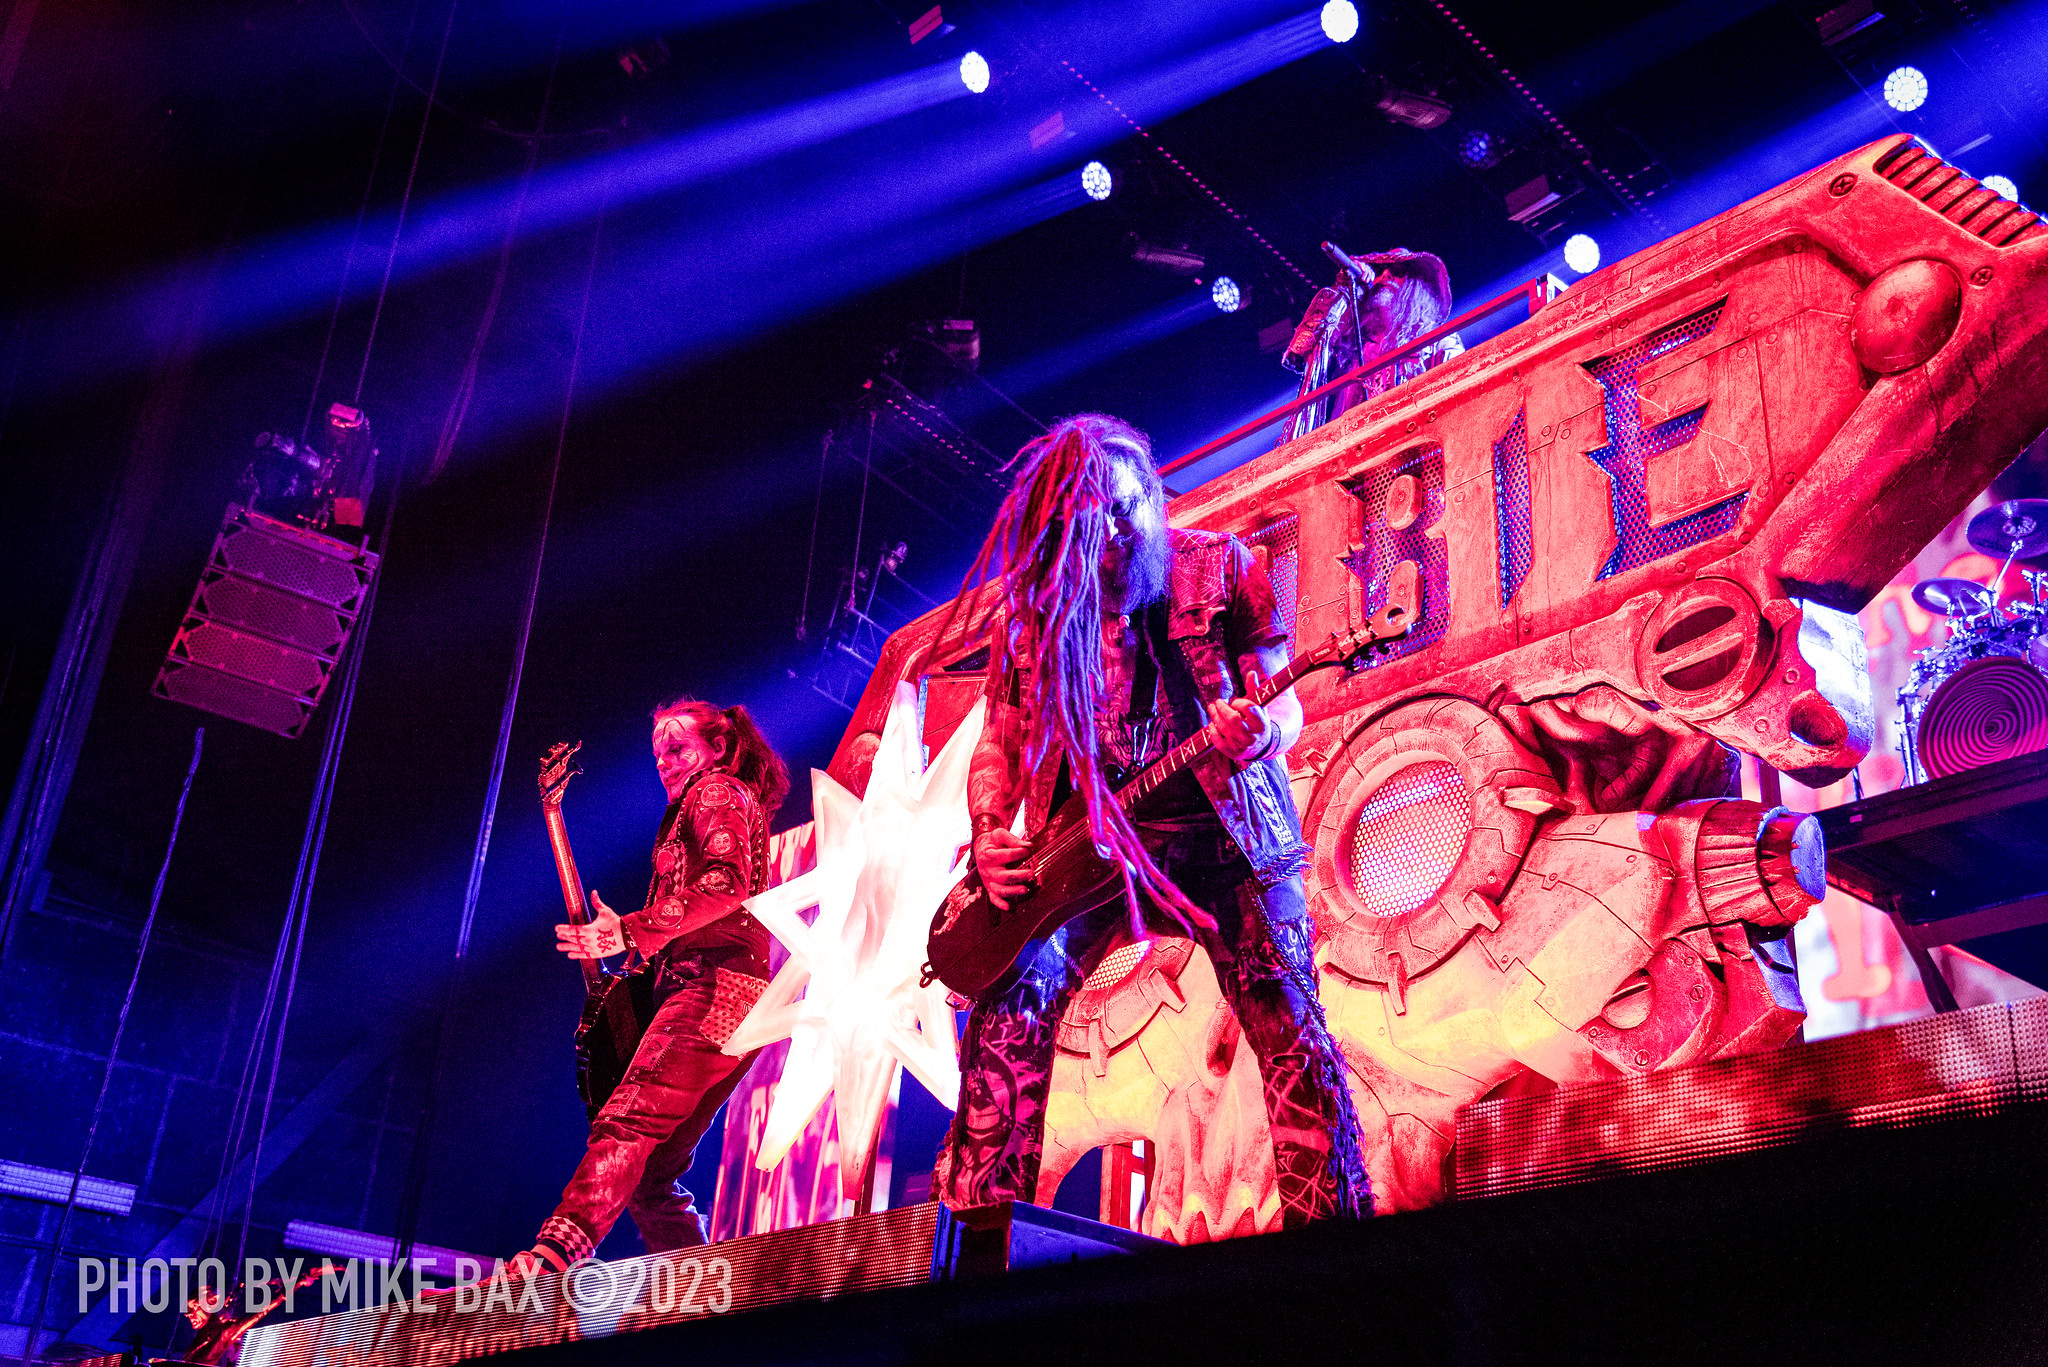 Rob Zombie on Sep 6, 2023, photo by Mike Bax